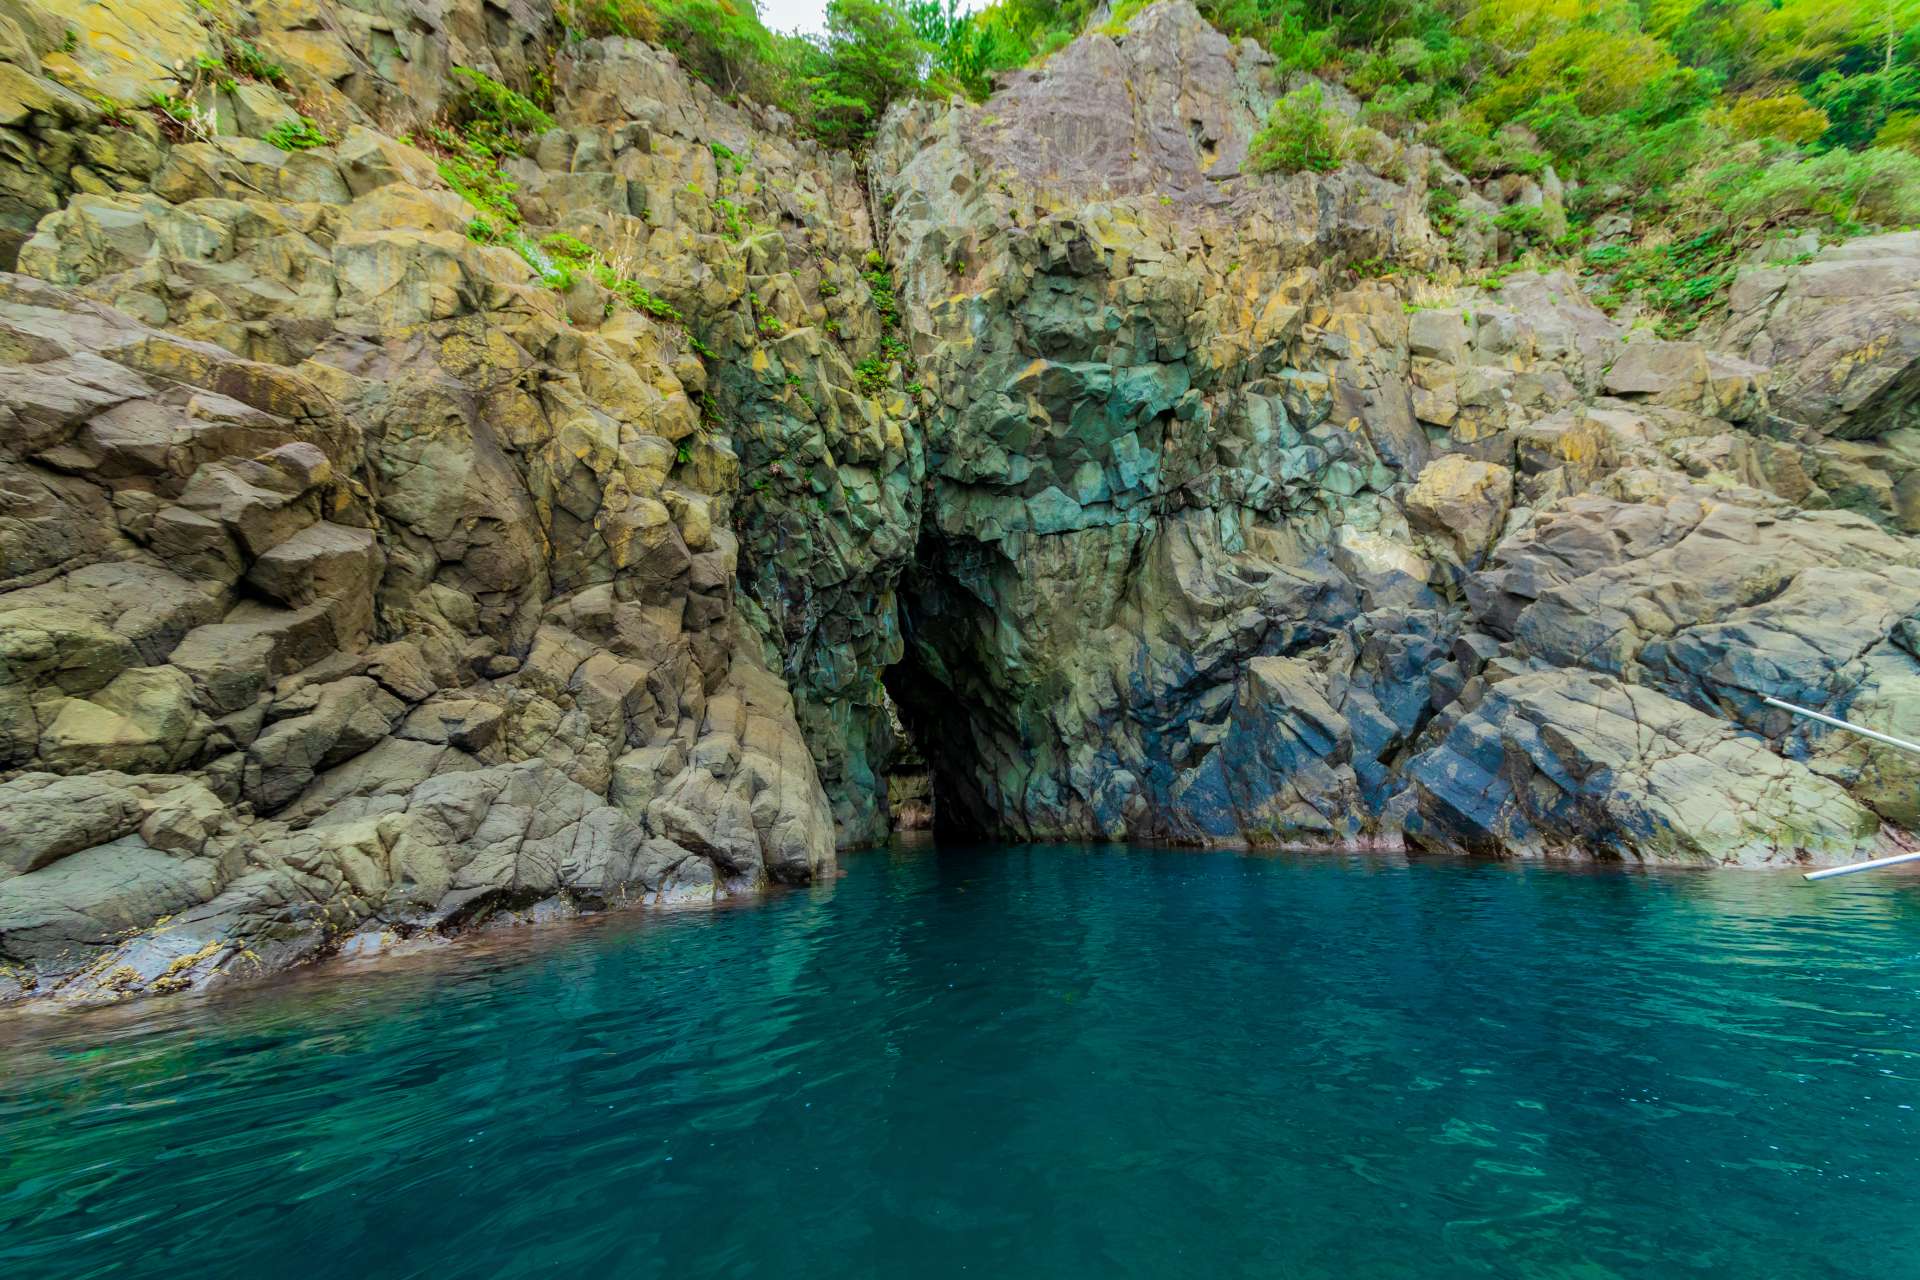 “Ao-no-Hiroba (The blue square)” in the cave is a highlight of the cruise of “Ao-no-Hiroba, and Taka-no-su Jima (60 minutes)”. On a sunny day, the sunlight reflects the surface of the water and creates a shining emerald green square.